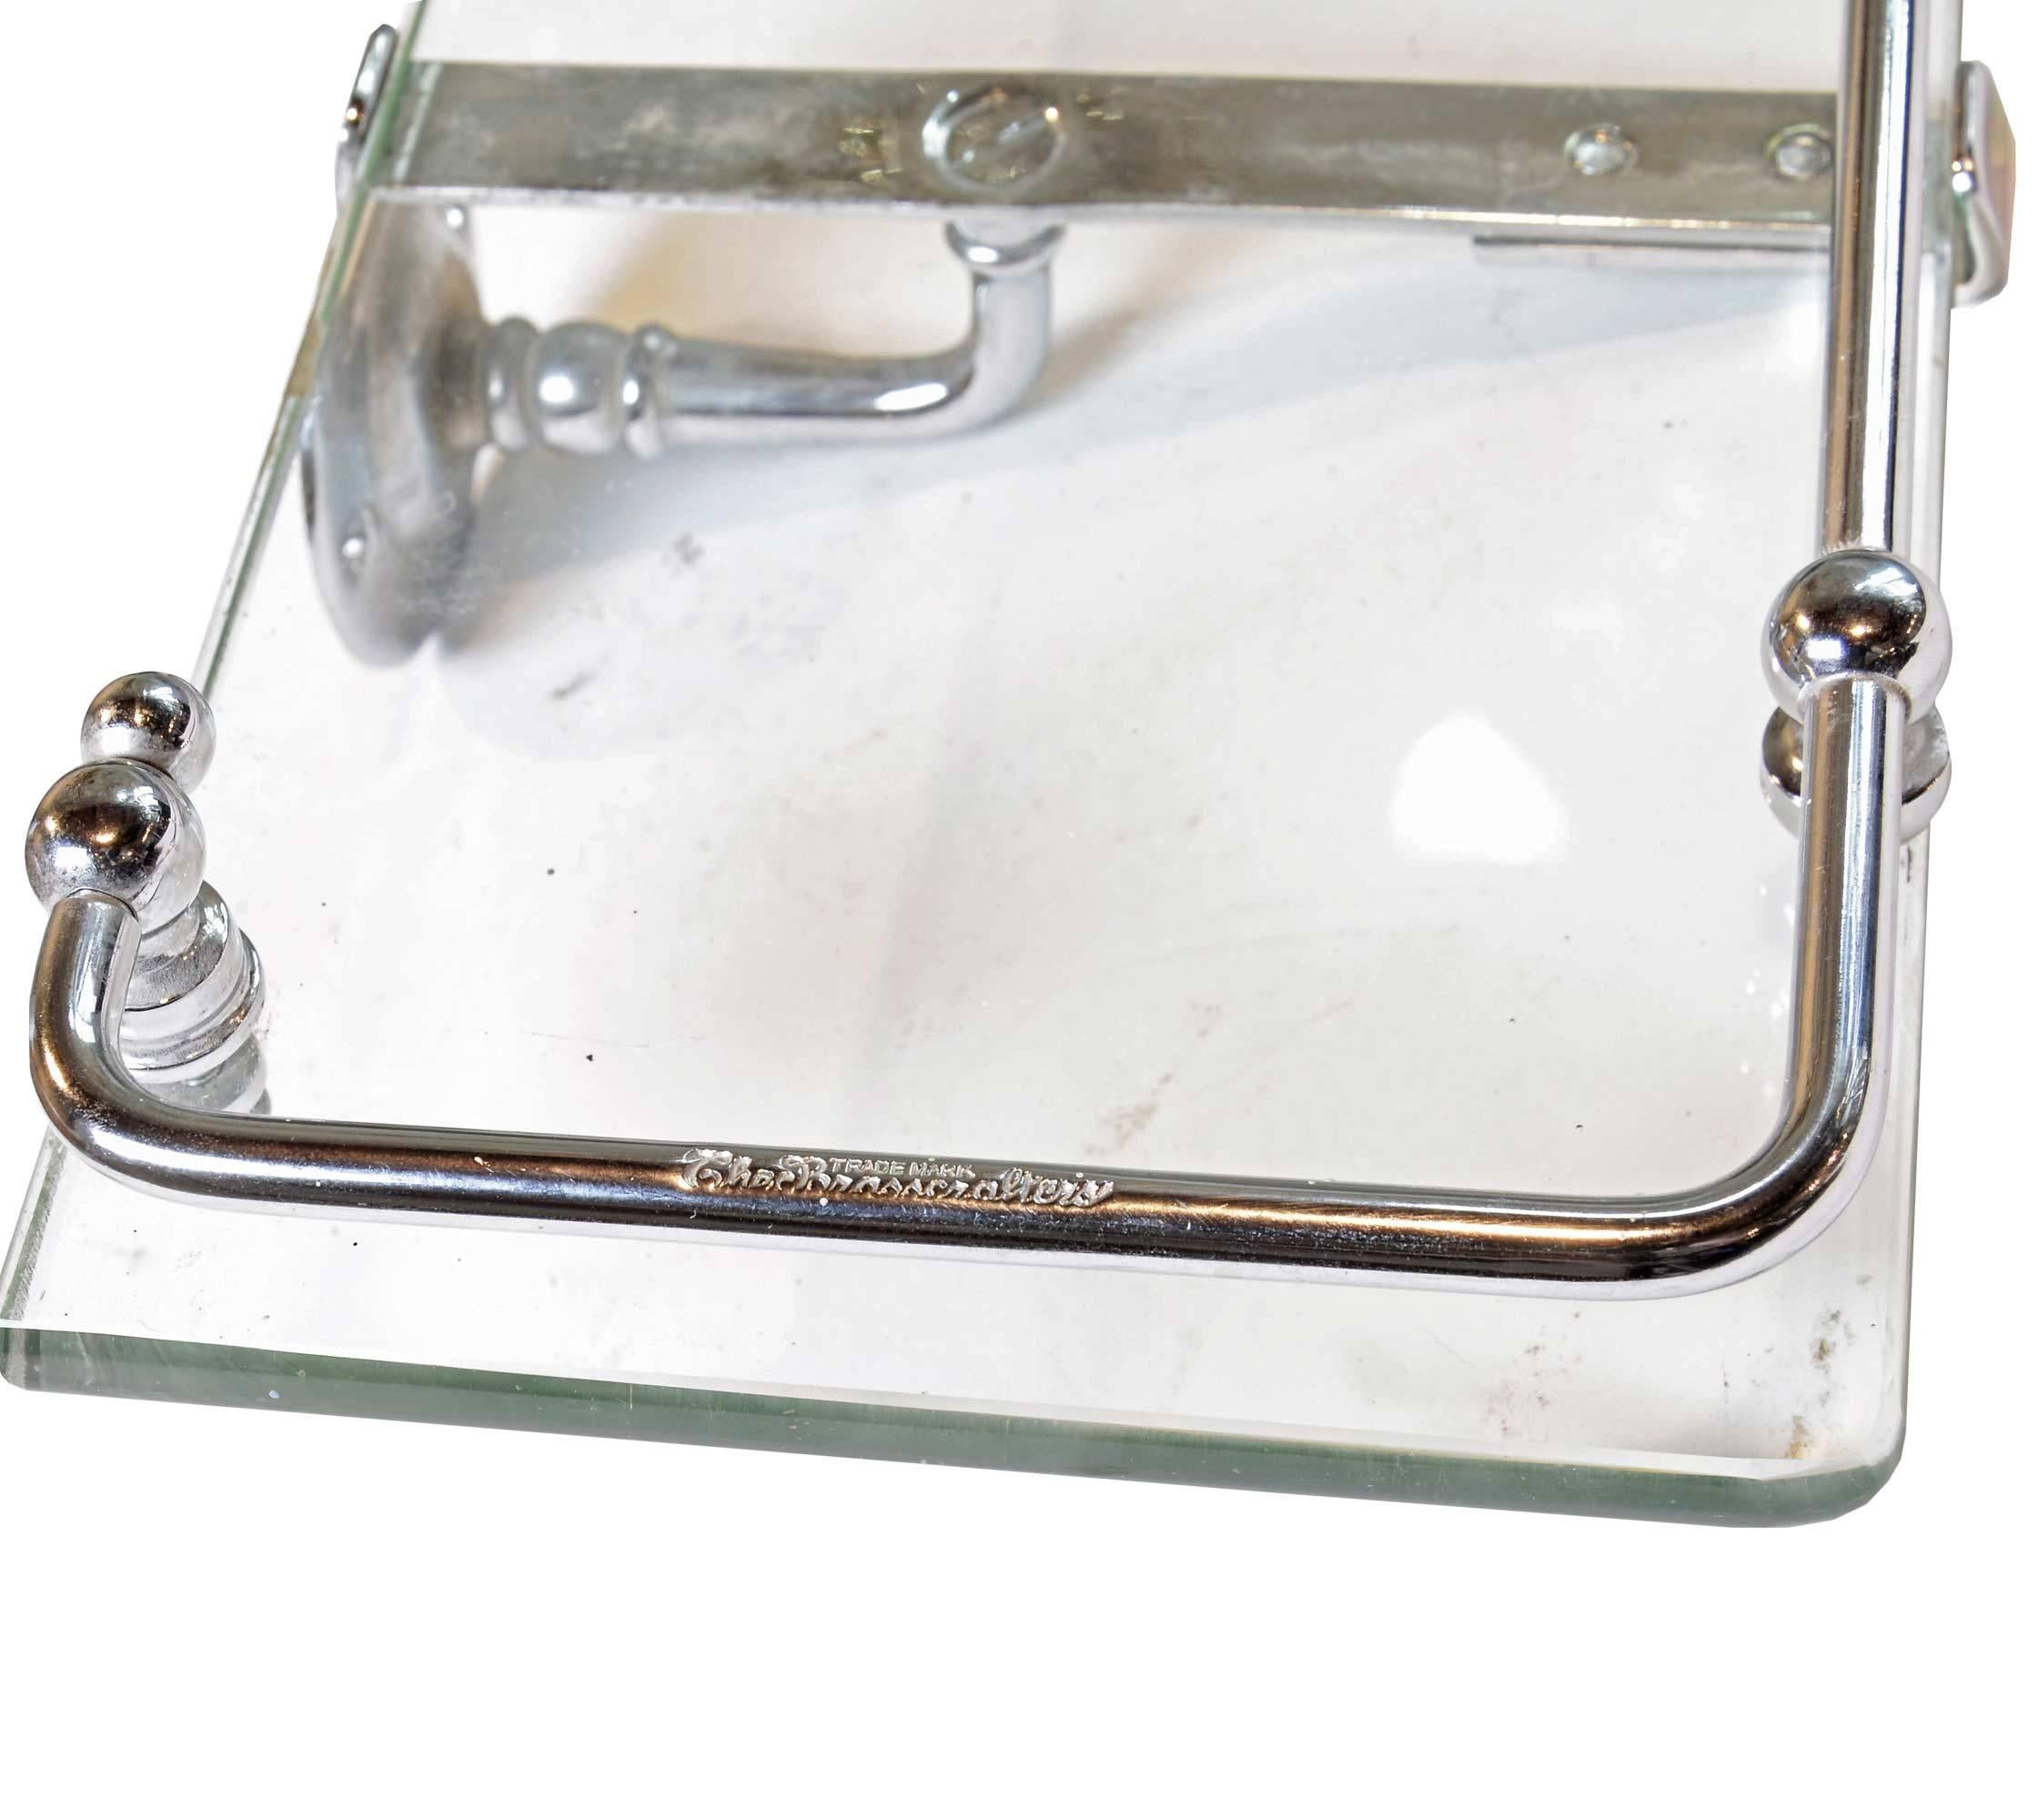 Glass and nickel-plated bath shelf with rail by The Brasscrafter, the premier company of the early 1900s for lavatory and bath accessories. The bath shelf is in pristine condition with no losses in the nickel, the glass plate is free of chips and